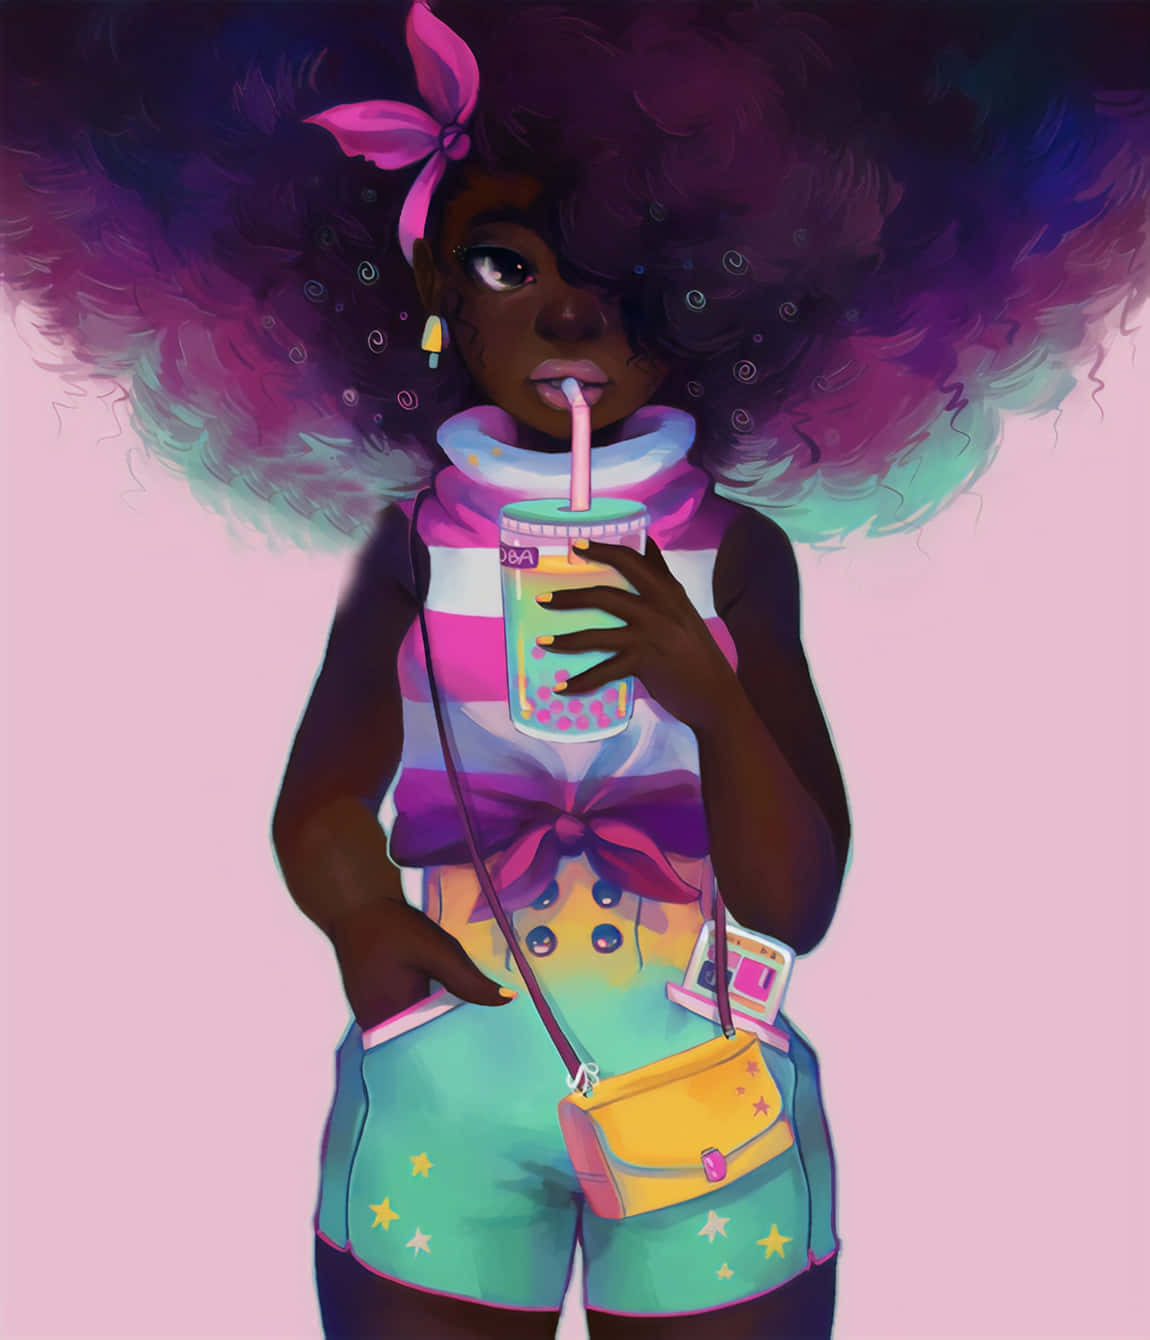 "Beauty radiates from within - celebrating the unique beauty of black girl aesthetic." Wallpaper